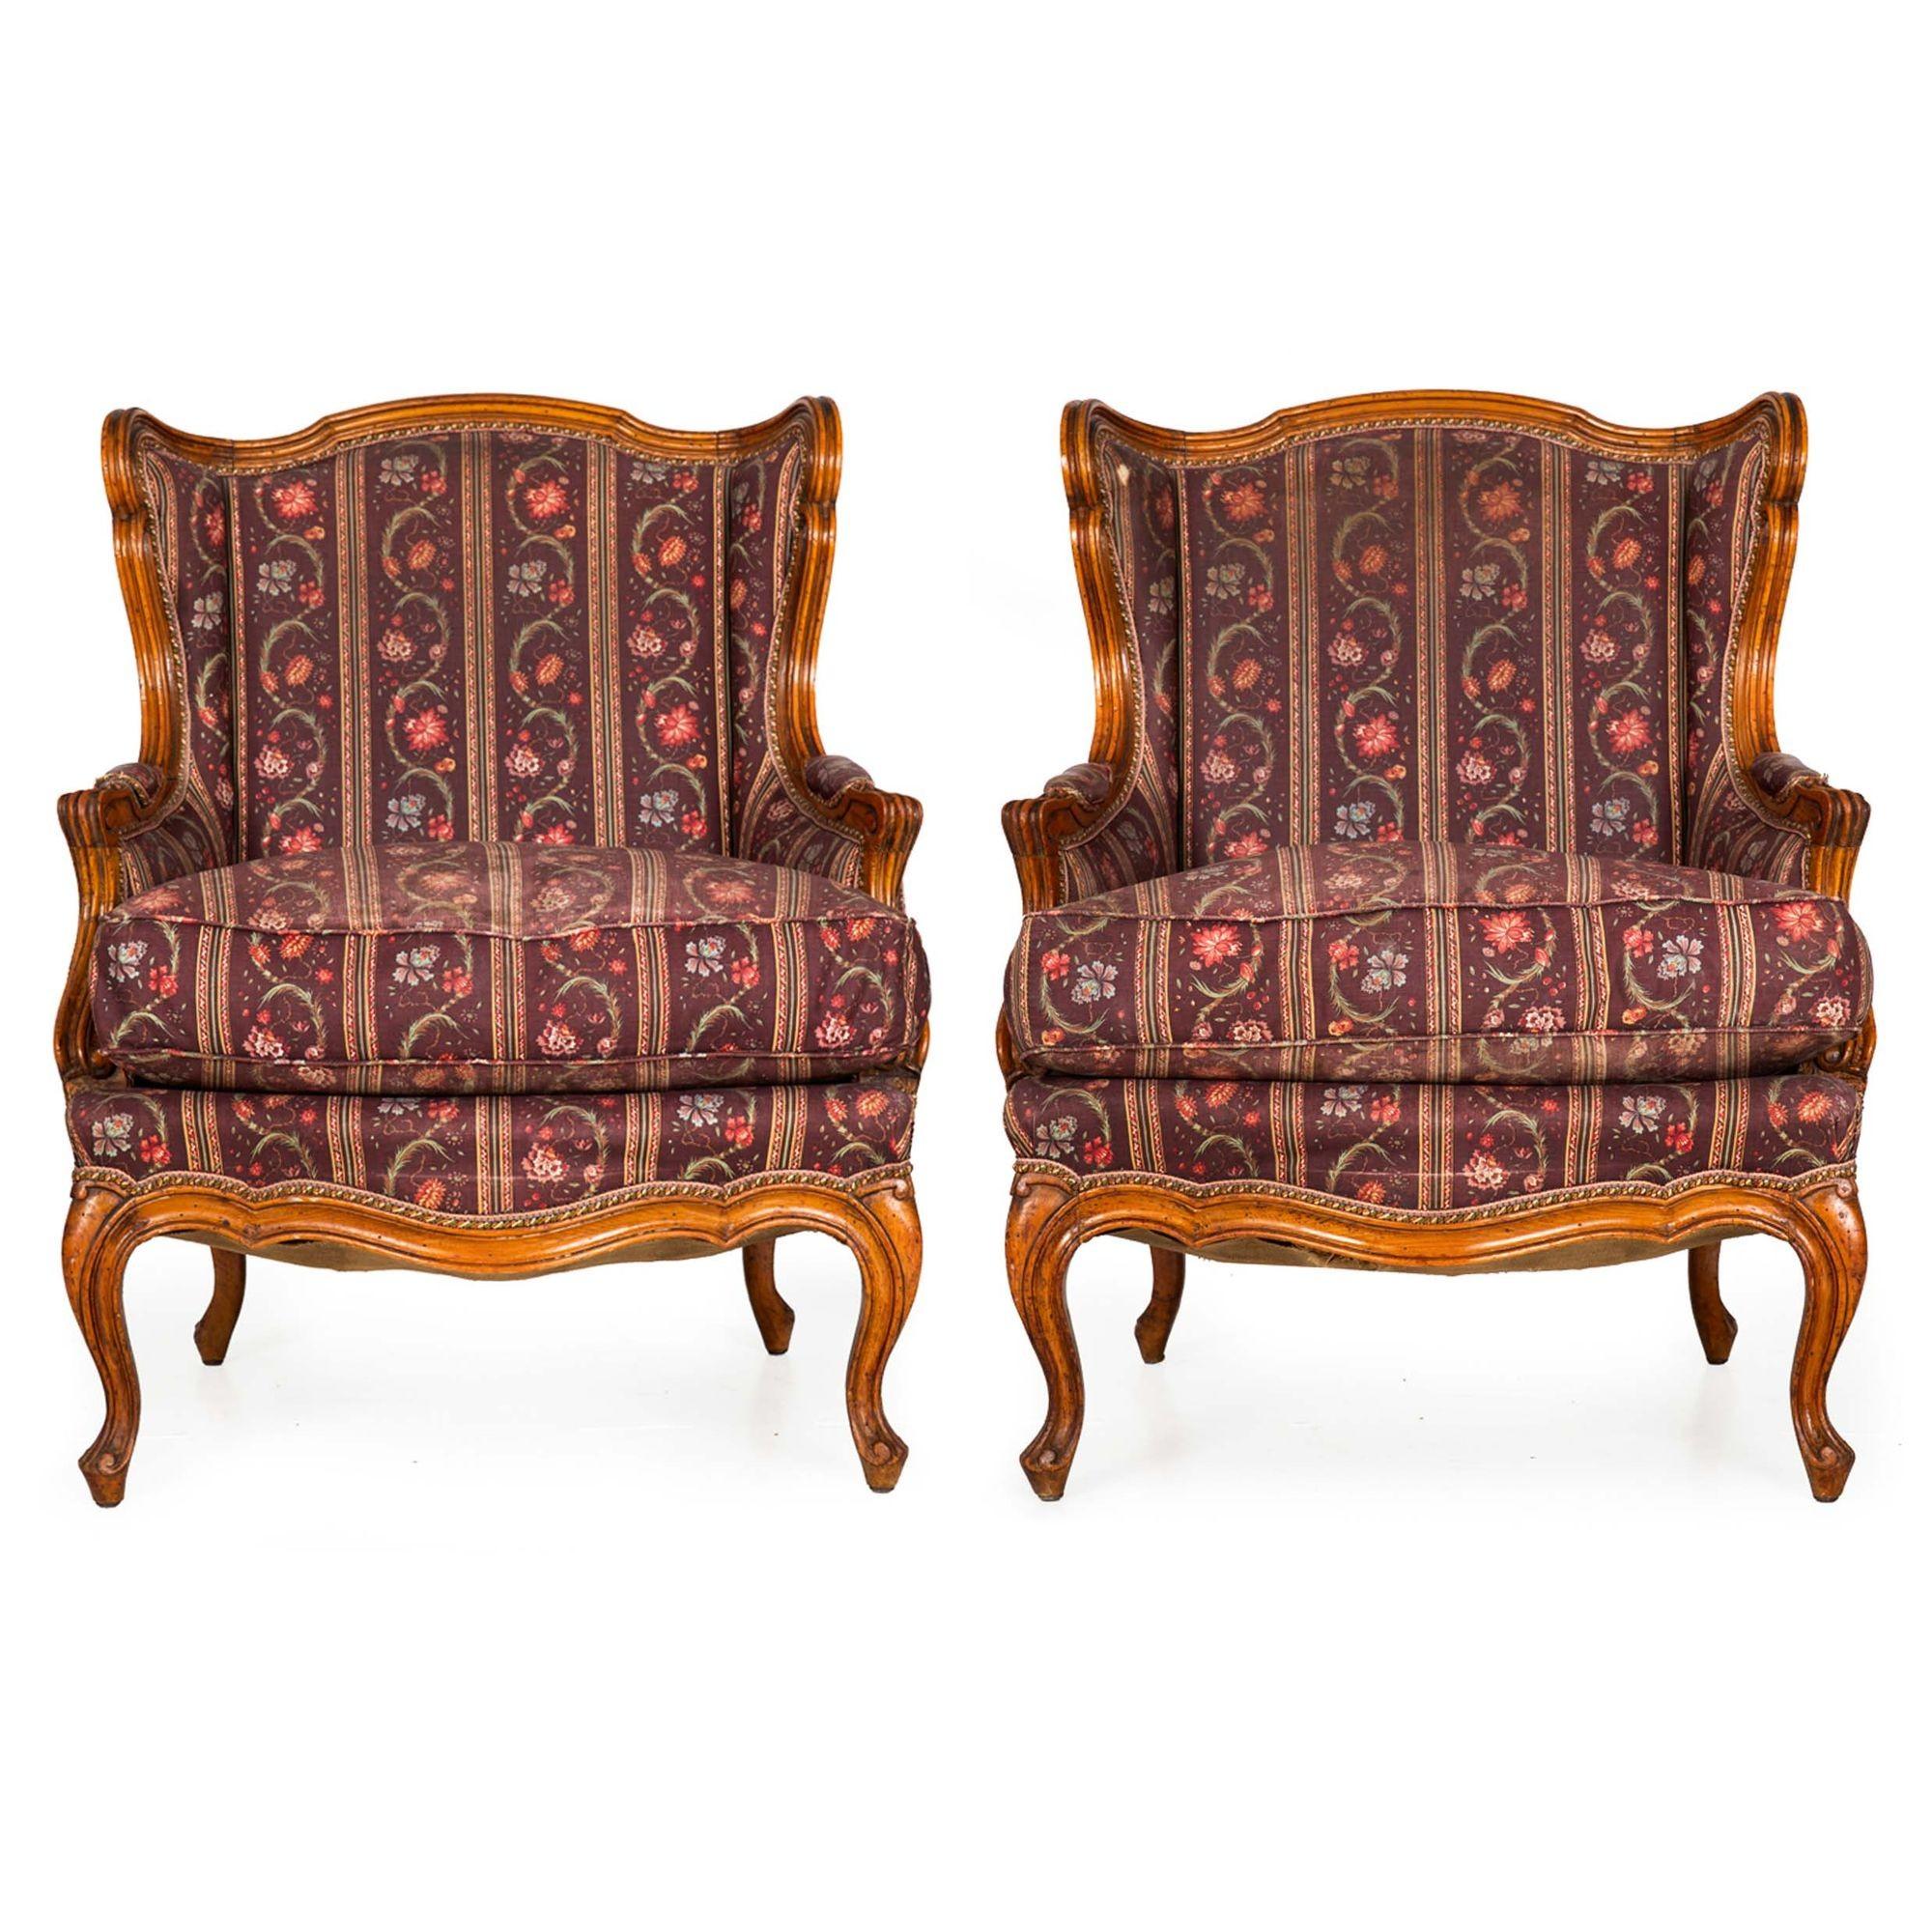 PAIR OF LOUIS XV STYLE PATINATED BEECHWOOD WINGBACK BERGERES
Circa late 19th century
Item # 306XGL21P 

A good pair of wingback bergere arm chairs in the Louis XV style, they feature beautifully patinated carved beechwood frames with reeded moldings